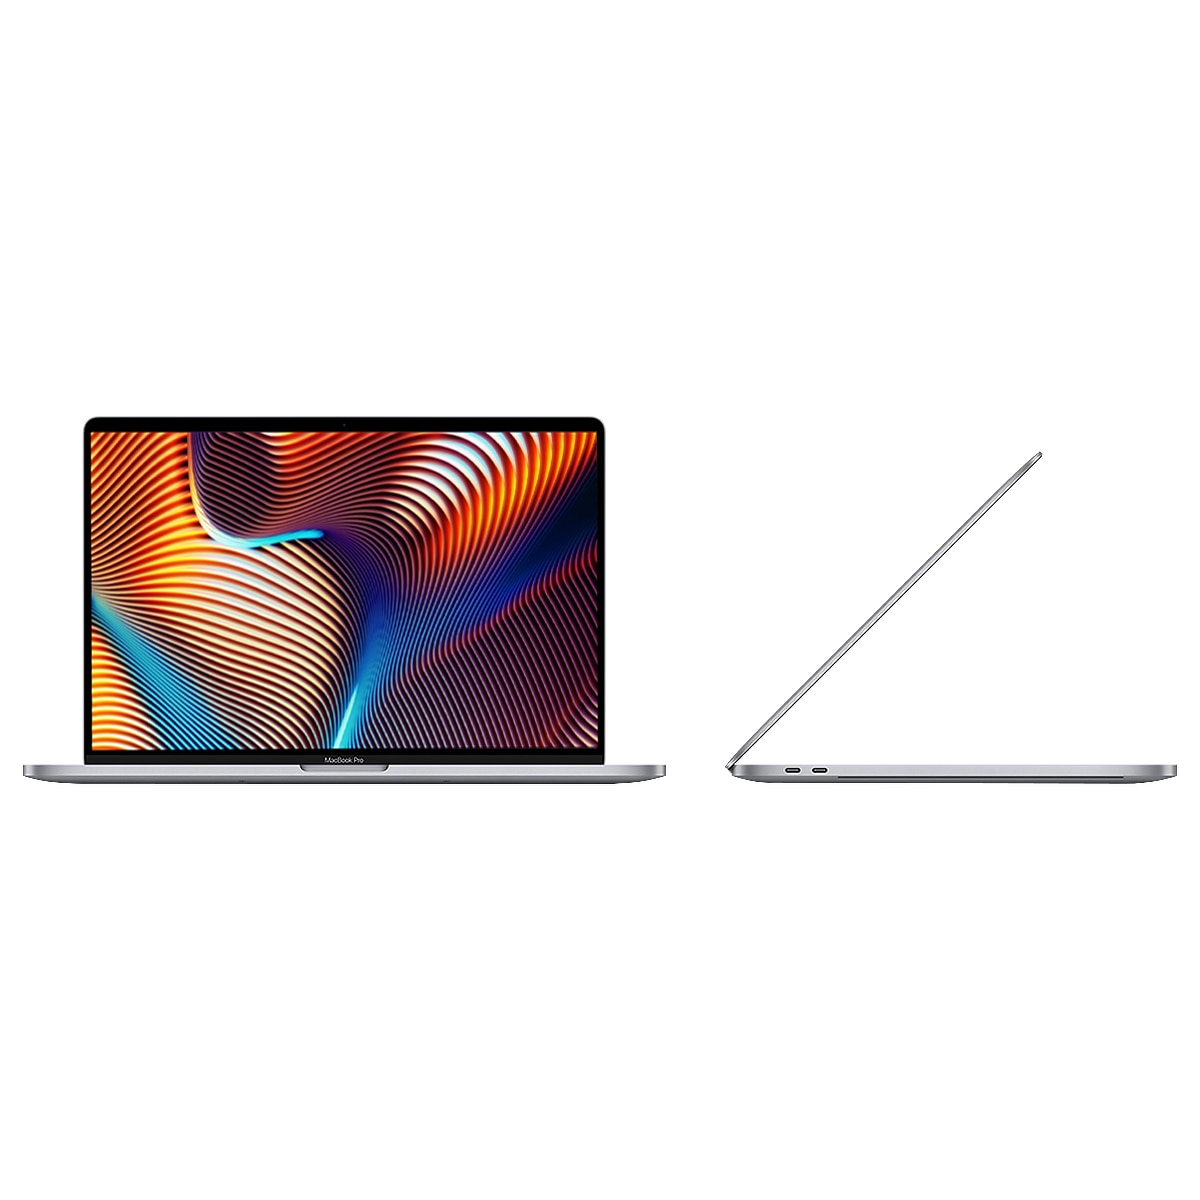 Macbook Pro MV902X/A 15-inch MacBook Pro with Touch Bar: 2.6GHz 6-core 9th-generation Intel Core i7 processor, 256GB - Space Grey